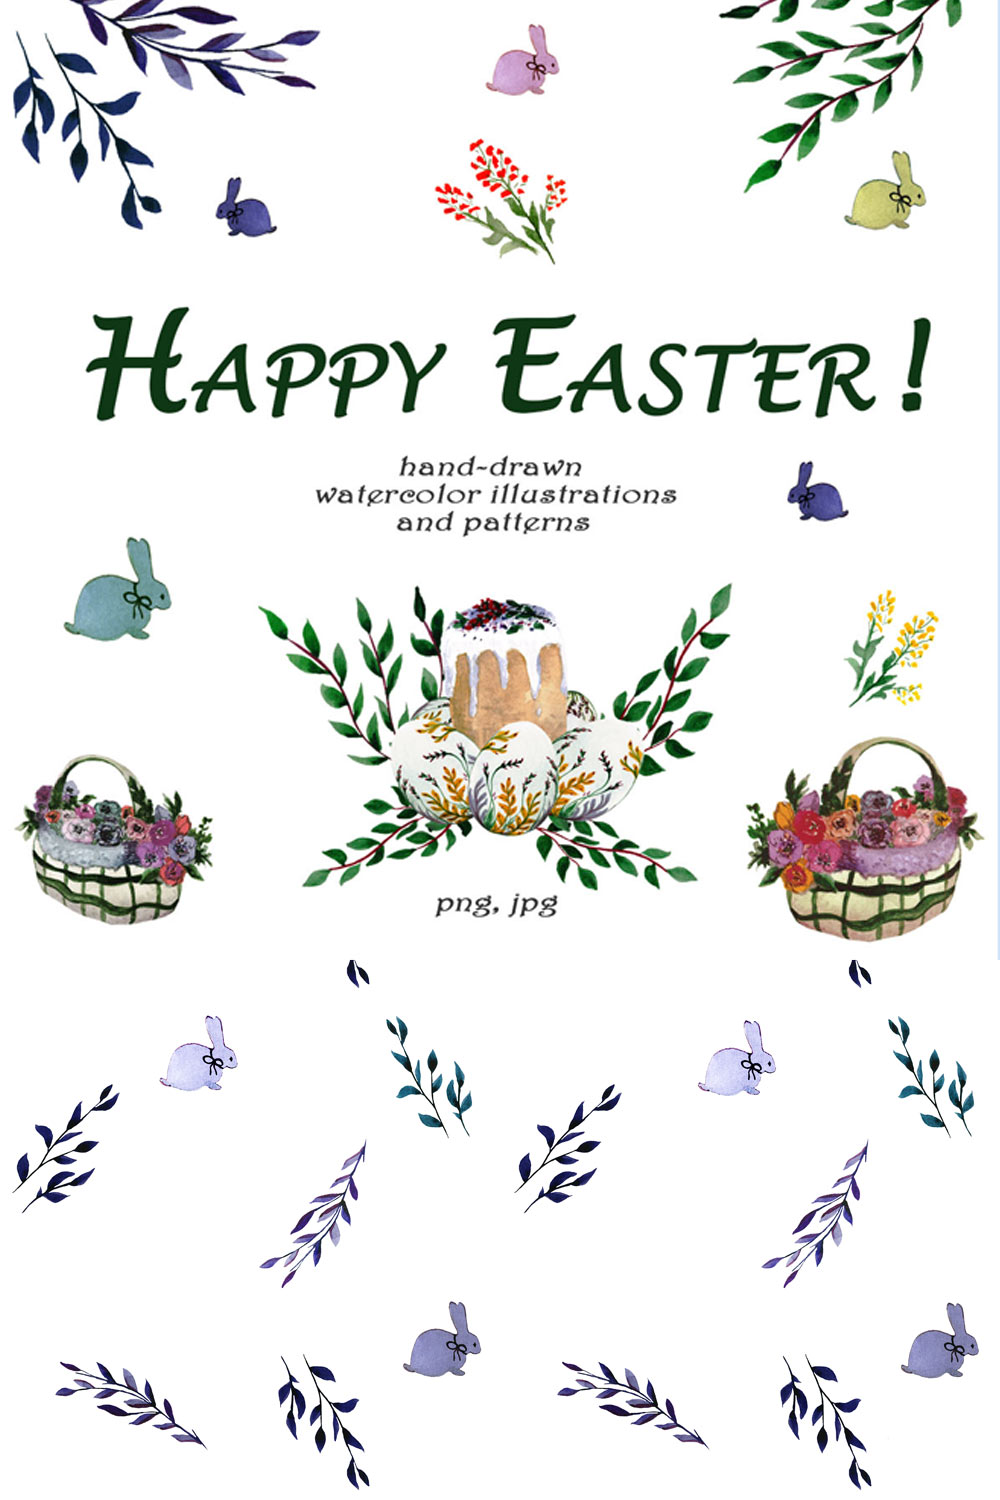 Watercolor Illustrations And Seamless Patterns With Spring Easter Mood Pinterest Image.